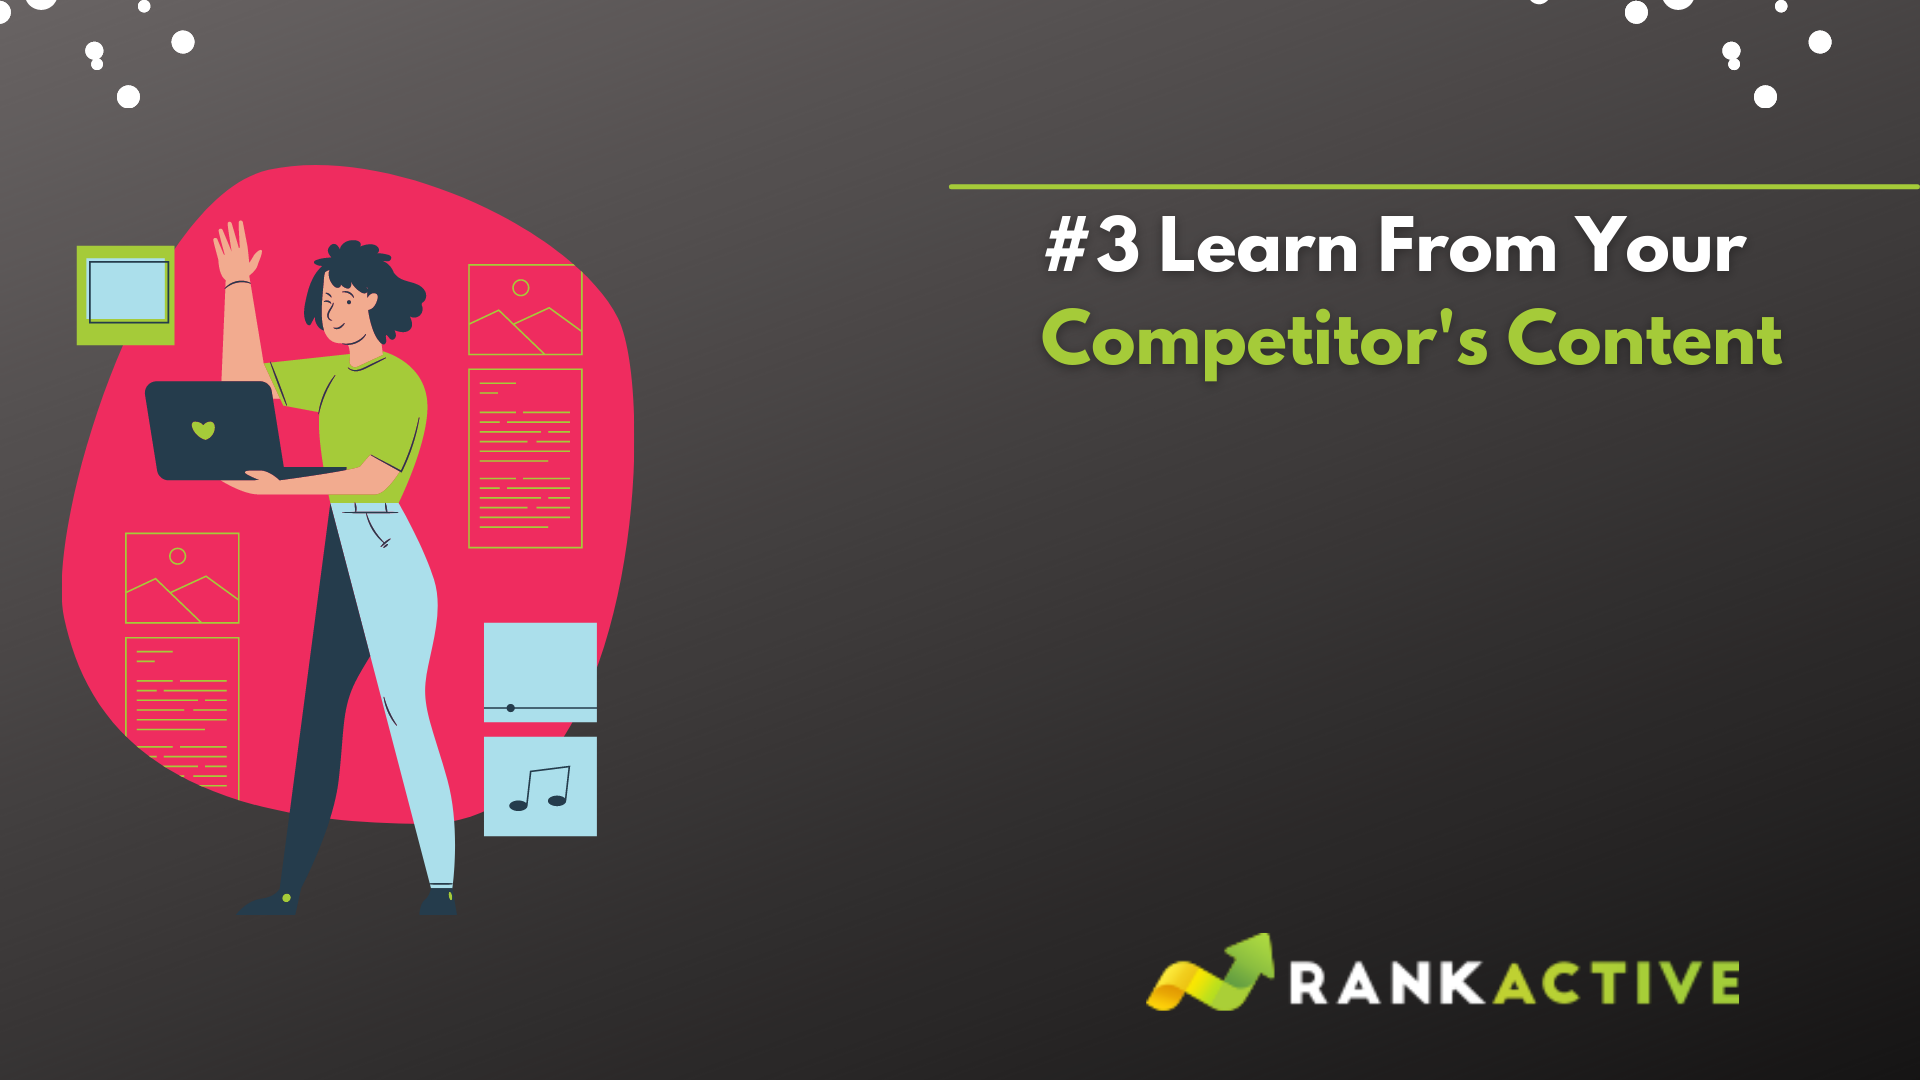 Learn from your competitor’s content